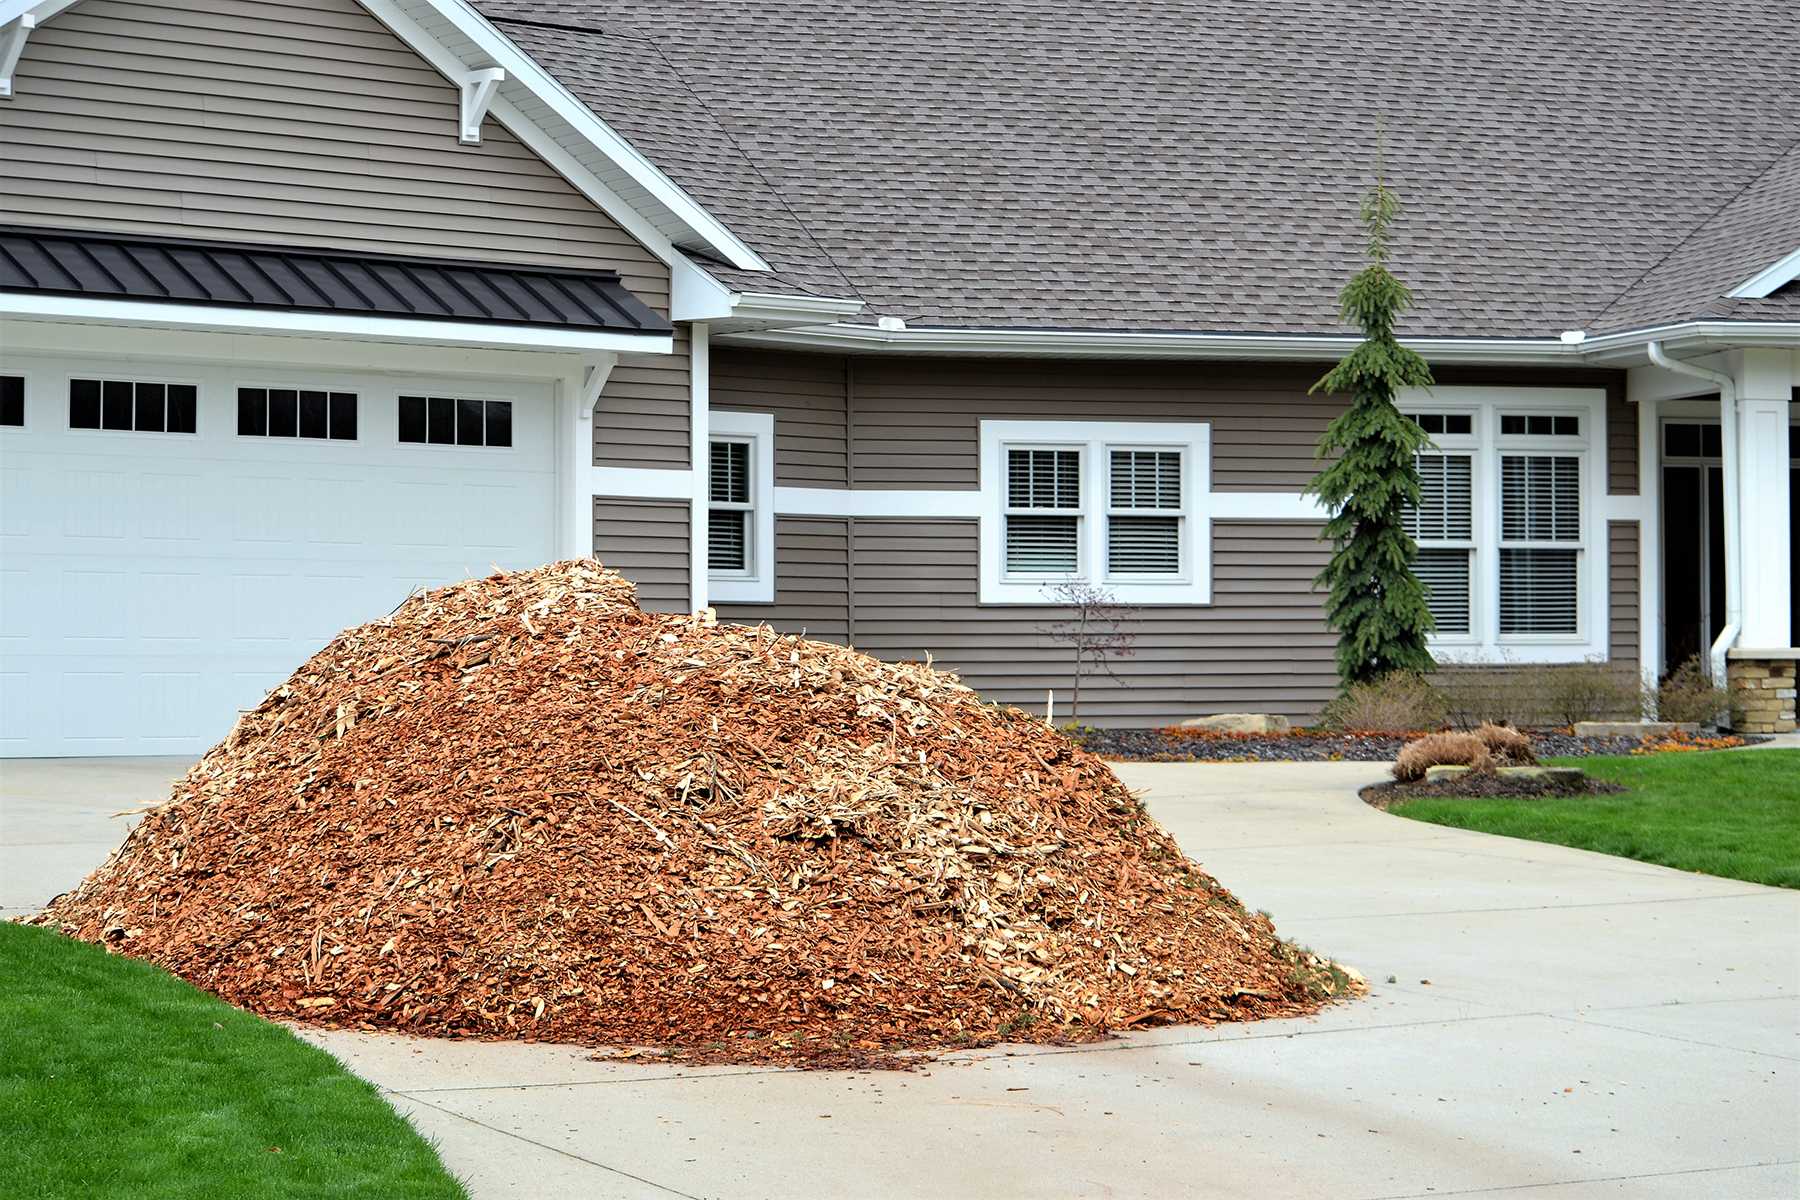 Green Garden Township Mulch Program graphic - photo of brown house with pile of mulch on cement driveway